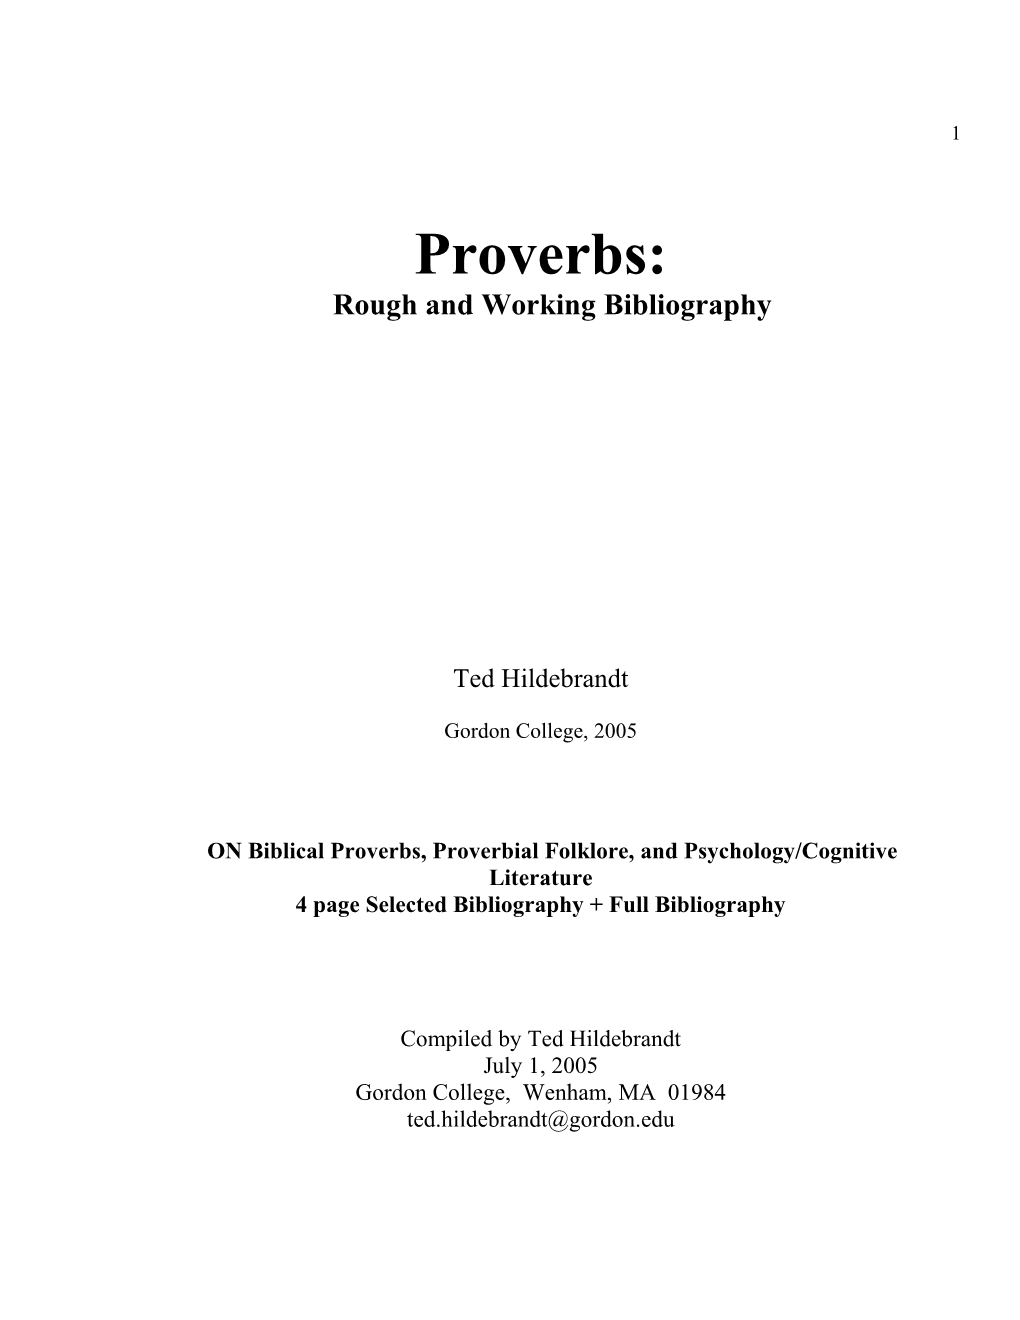 Proverbs a Rough and Working Bibliography (2005) s1